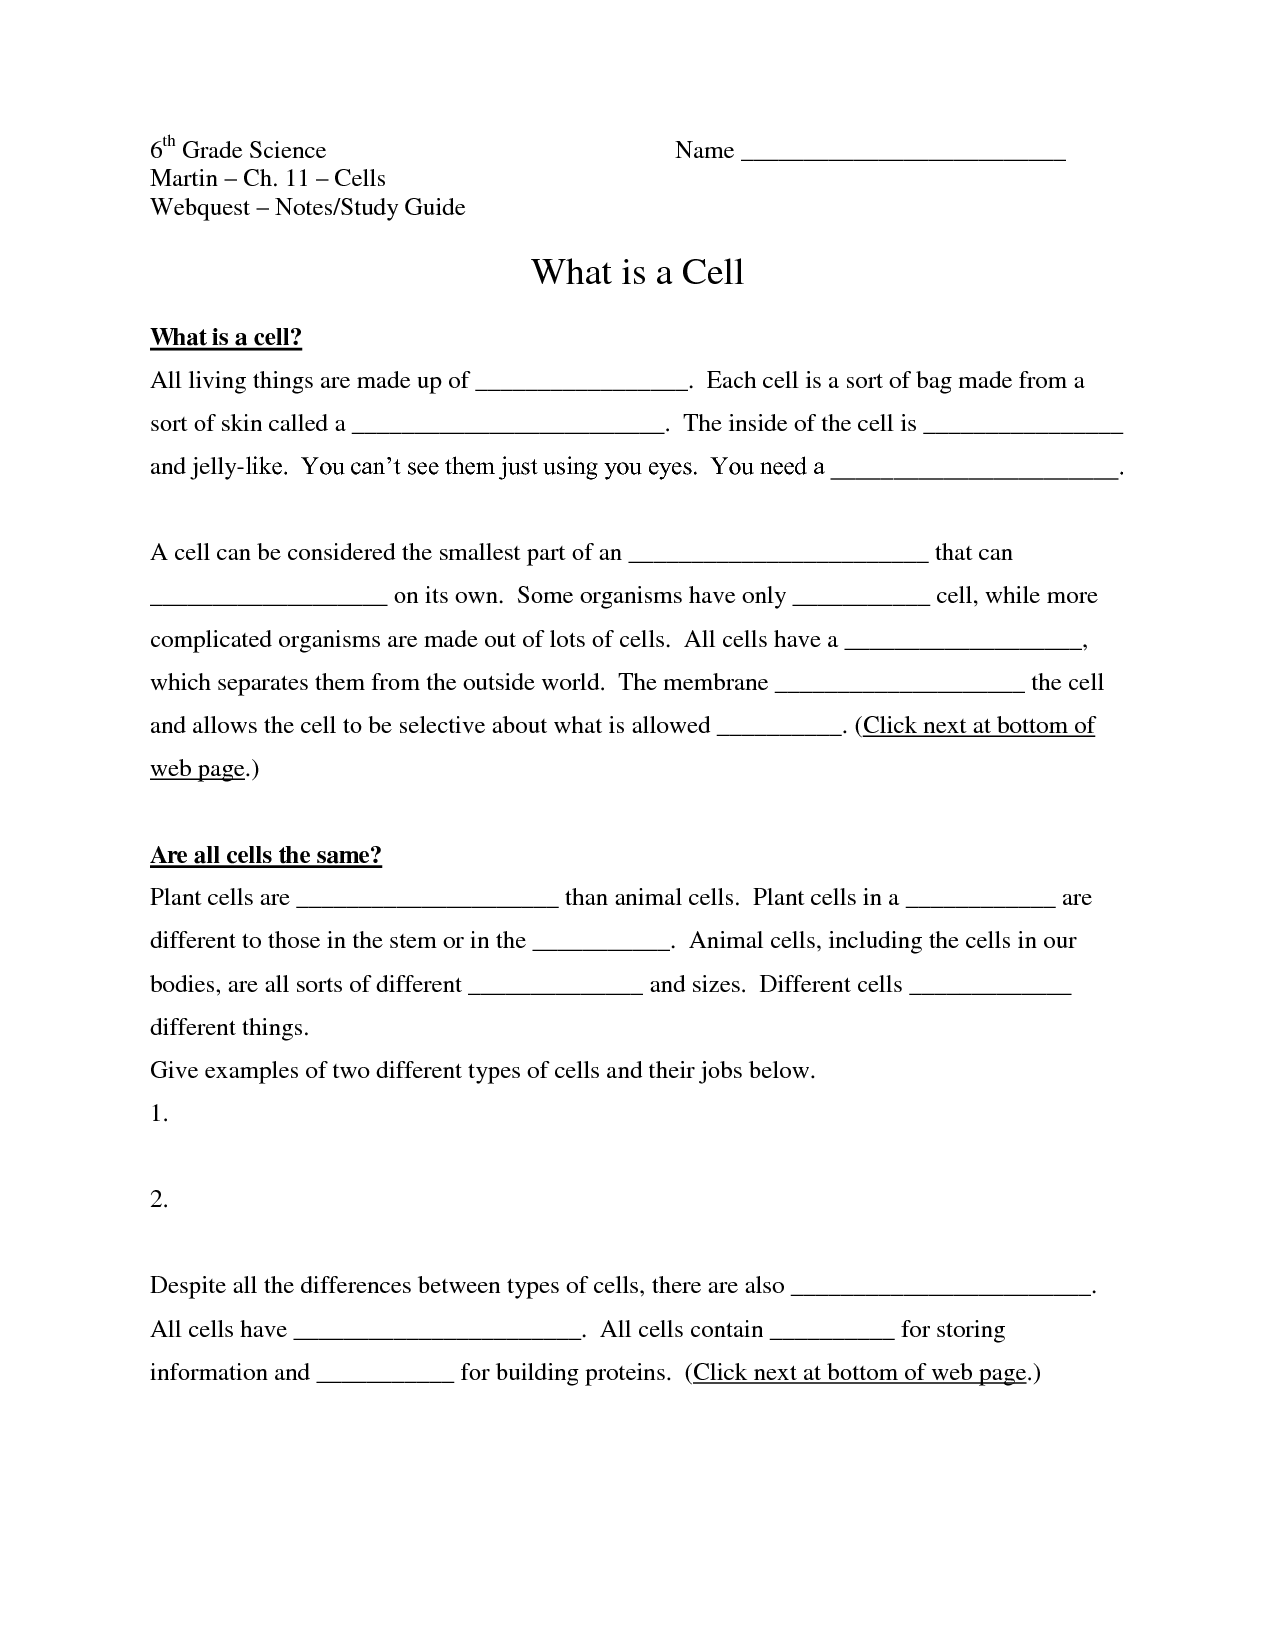 Printable Worksheets for 6th Grade Plant Cell Image